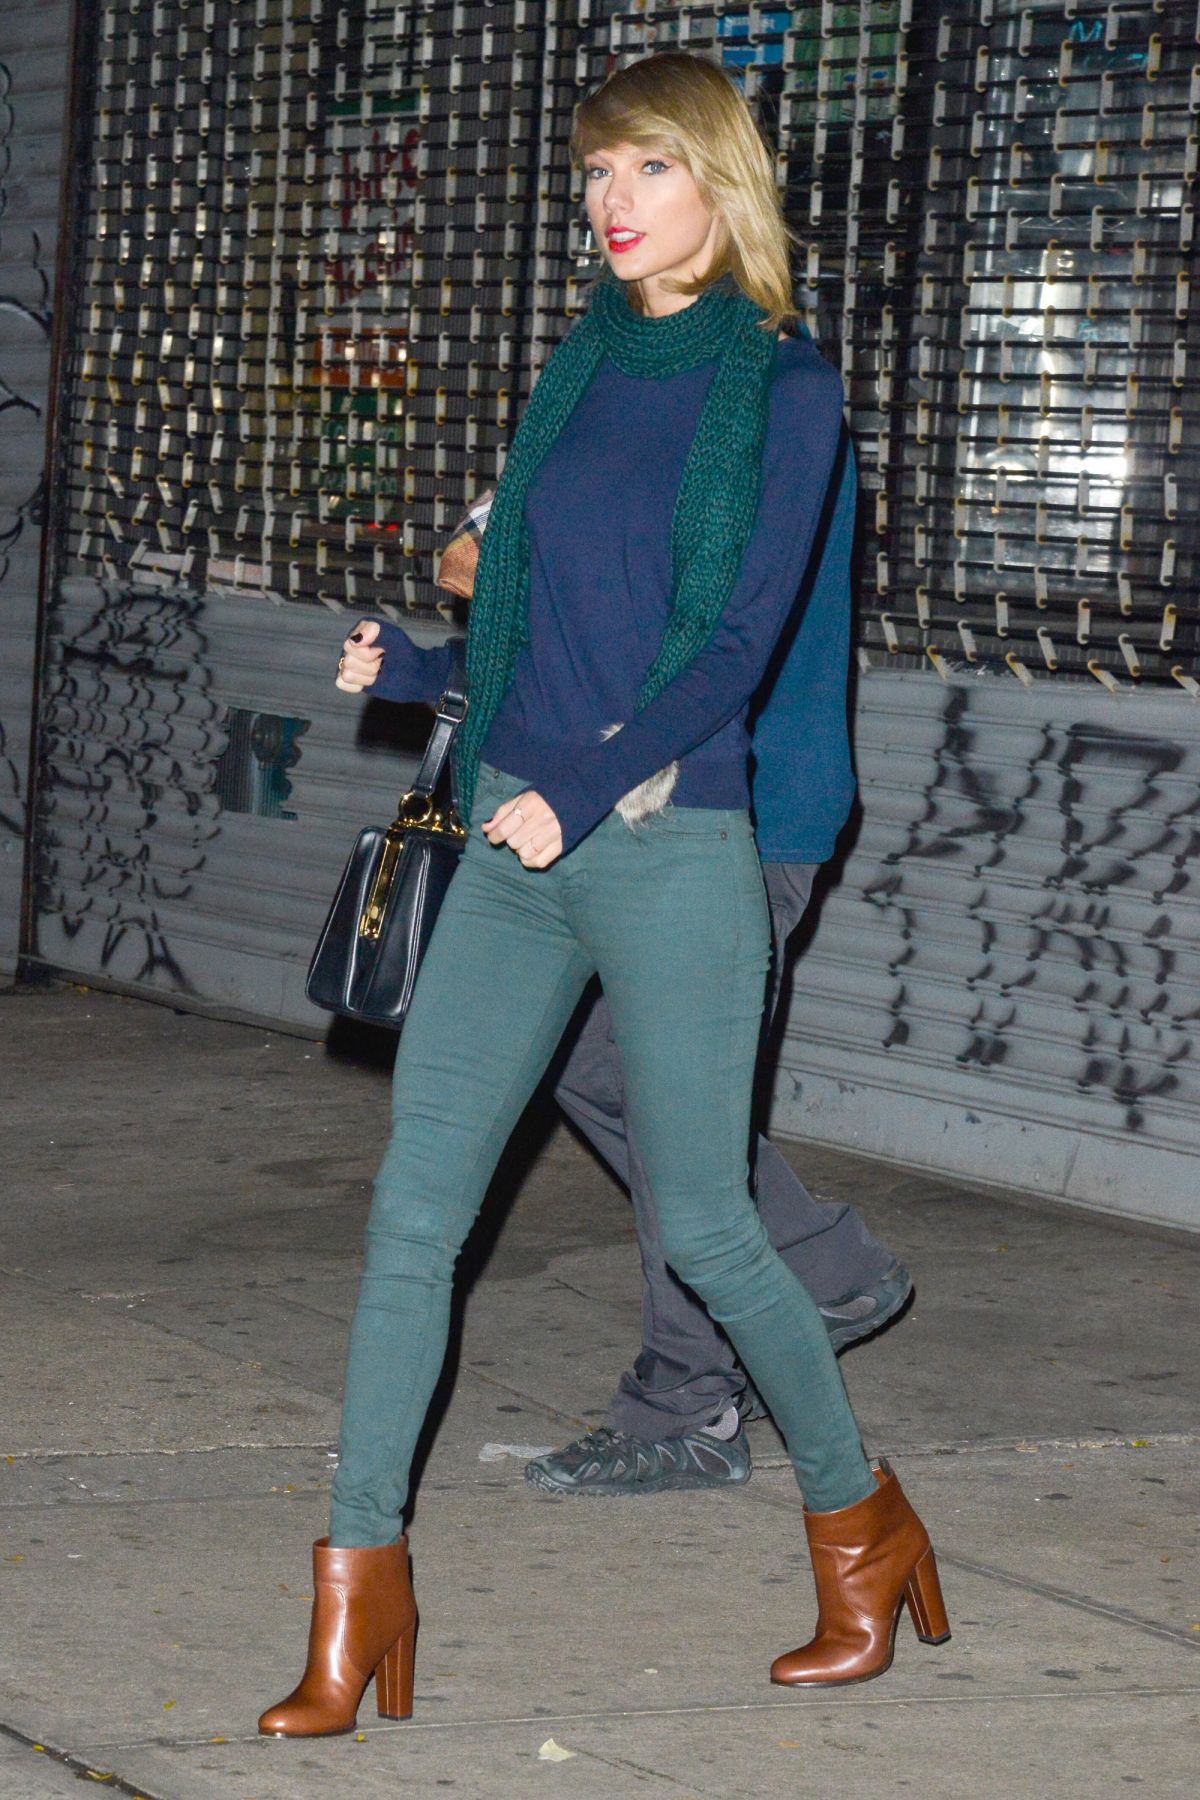 TAYLOR SWIFT Leaves a Gym in New York – HawtCelebs